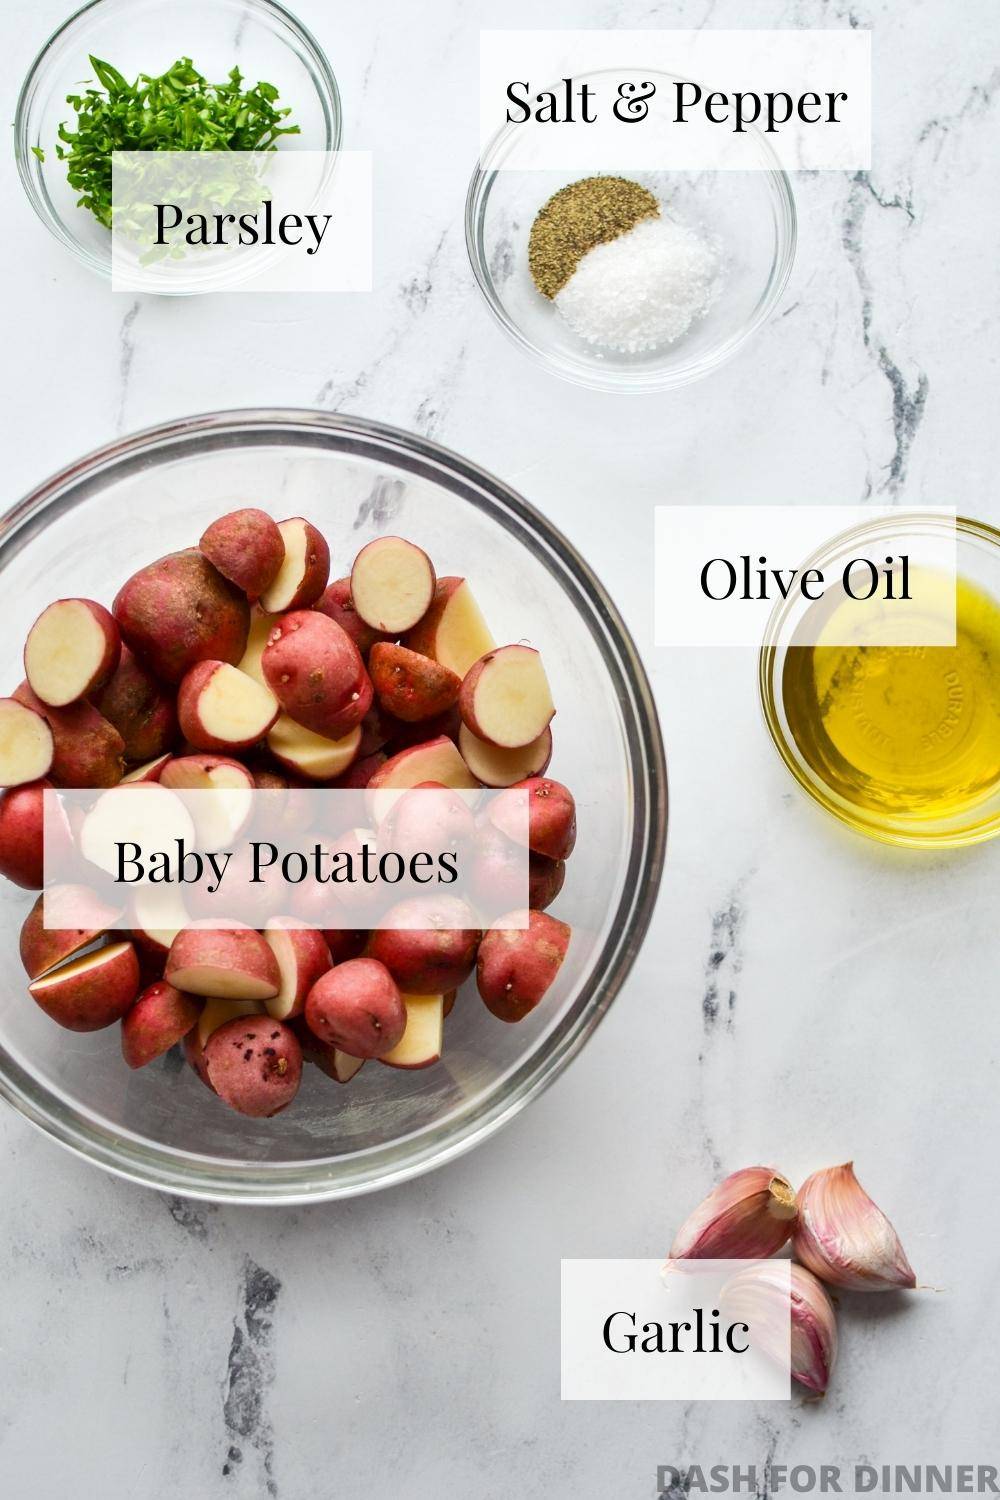 The ingredients needed to make baby potatoes, including olive oil, salt, pepper, garlic, and parsley.